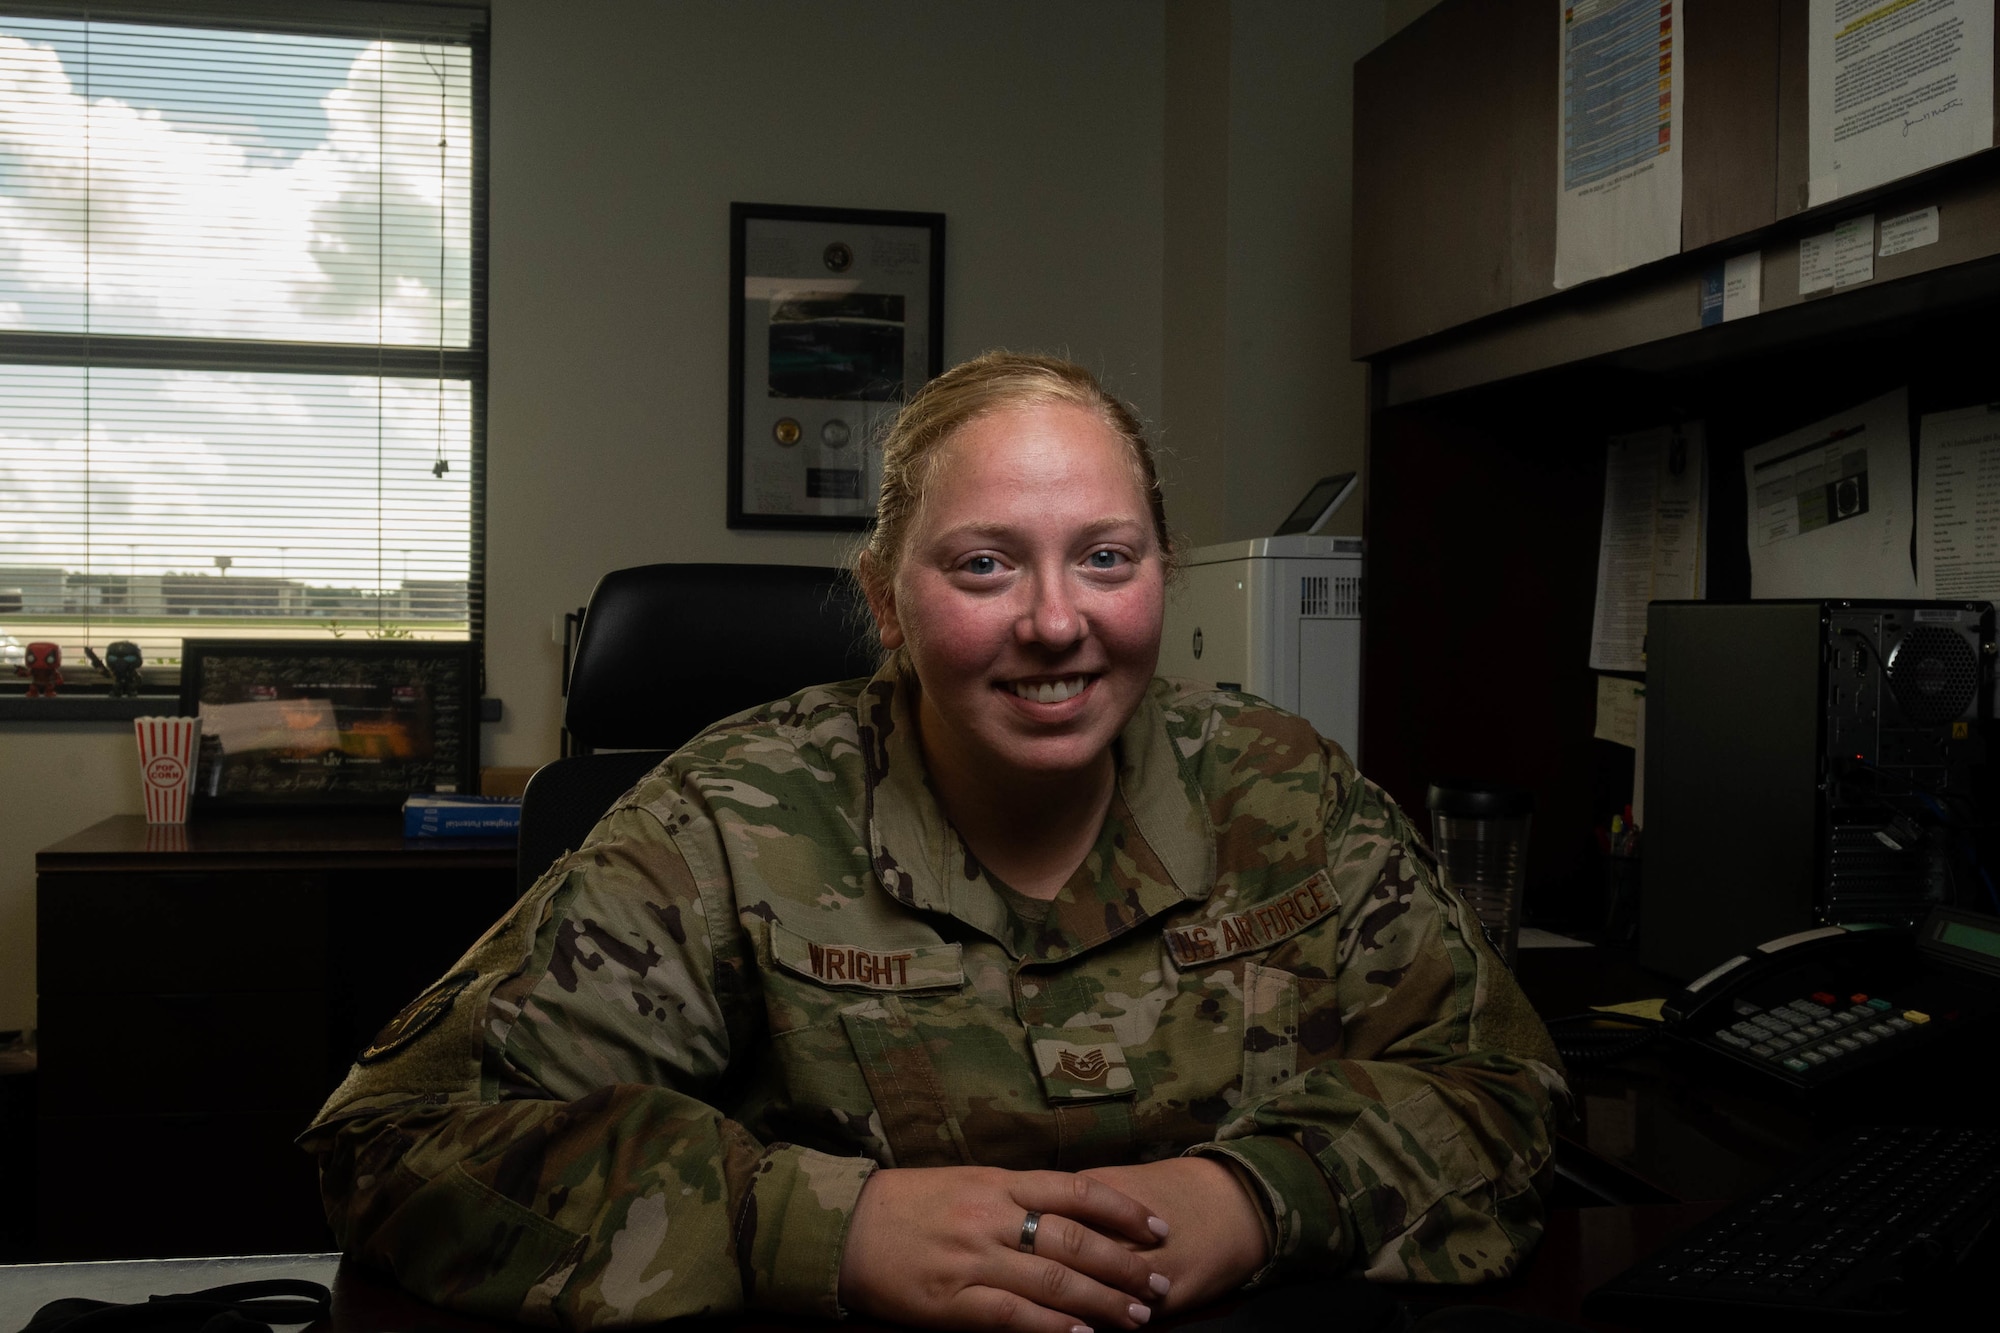 U.S. Air Force Tech. Sgt. Mandy Wright, a 23rd Special Operations Weather Squadron weather craftsman, pauses for a photo at Hurlburt Field, Florida, Aug. 19, 2021. Wright is responsible for monitoring storm systems, briefing prior to flying missions, and updating the wing commander on potential storm threats to base resources. U.S. Air Force photo by Staff Sgt. Rito Smith)